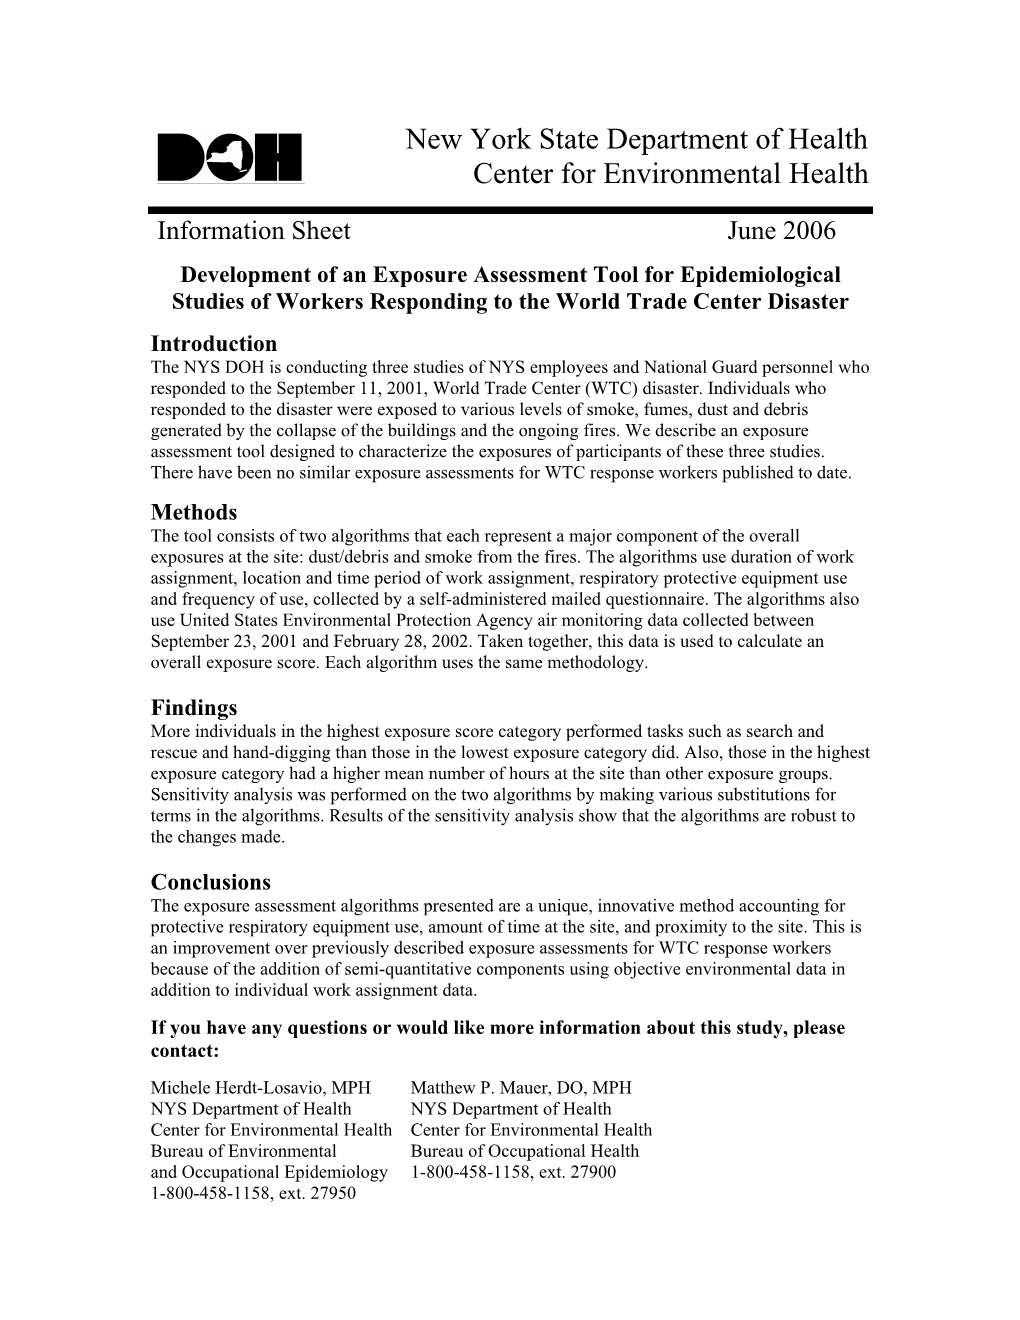 Development of an Exposure Assessment Tool for Epidemiological Studies of Workers Responding to the World Trade Center Disaster